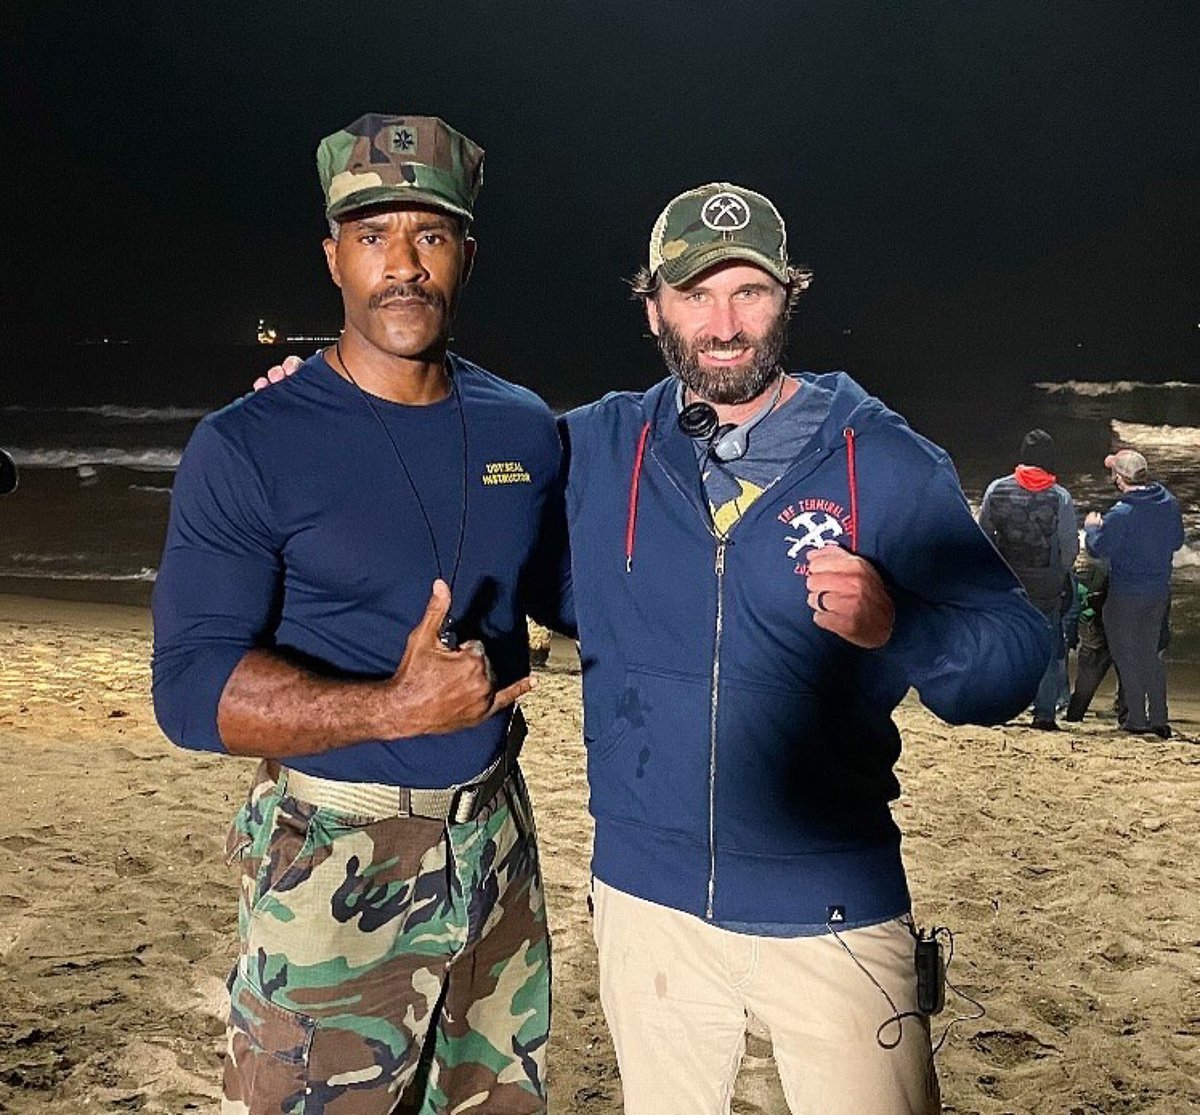 Happy Birthday to @lamonicagarrett pictured here on the set of THE TERMINAL LIST or possibly on the beach in Coronado, CA for BUD/S Hell Week.  Have a great one, my friend! 
•
#LaMonicaGarrett #TheTerminalList #HappyBirthday